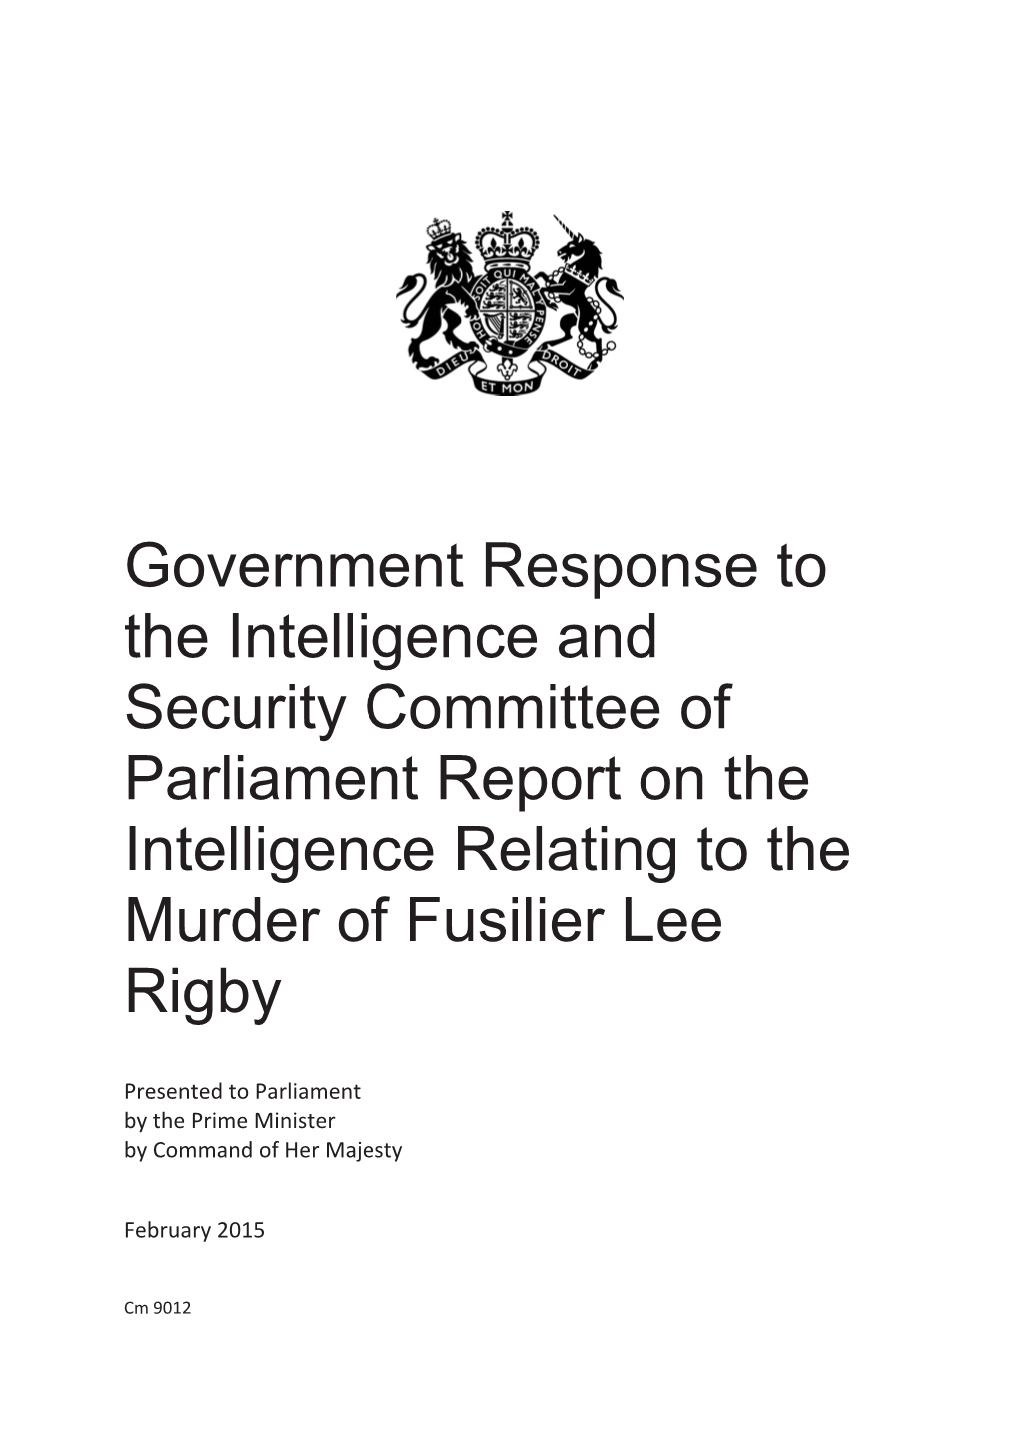 Government Response to 'Report on the Intelligence Relating to the Murder of Fusilier Lee Rigby'